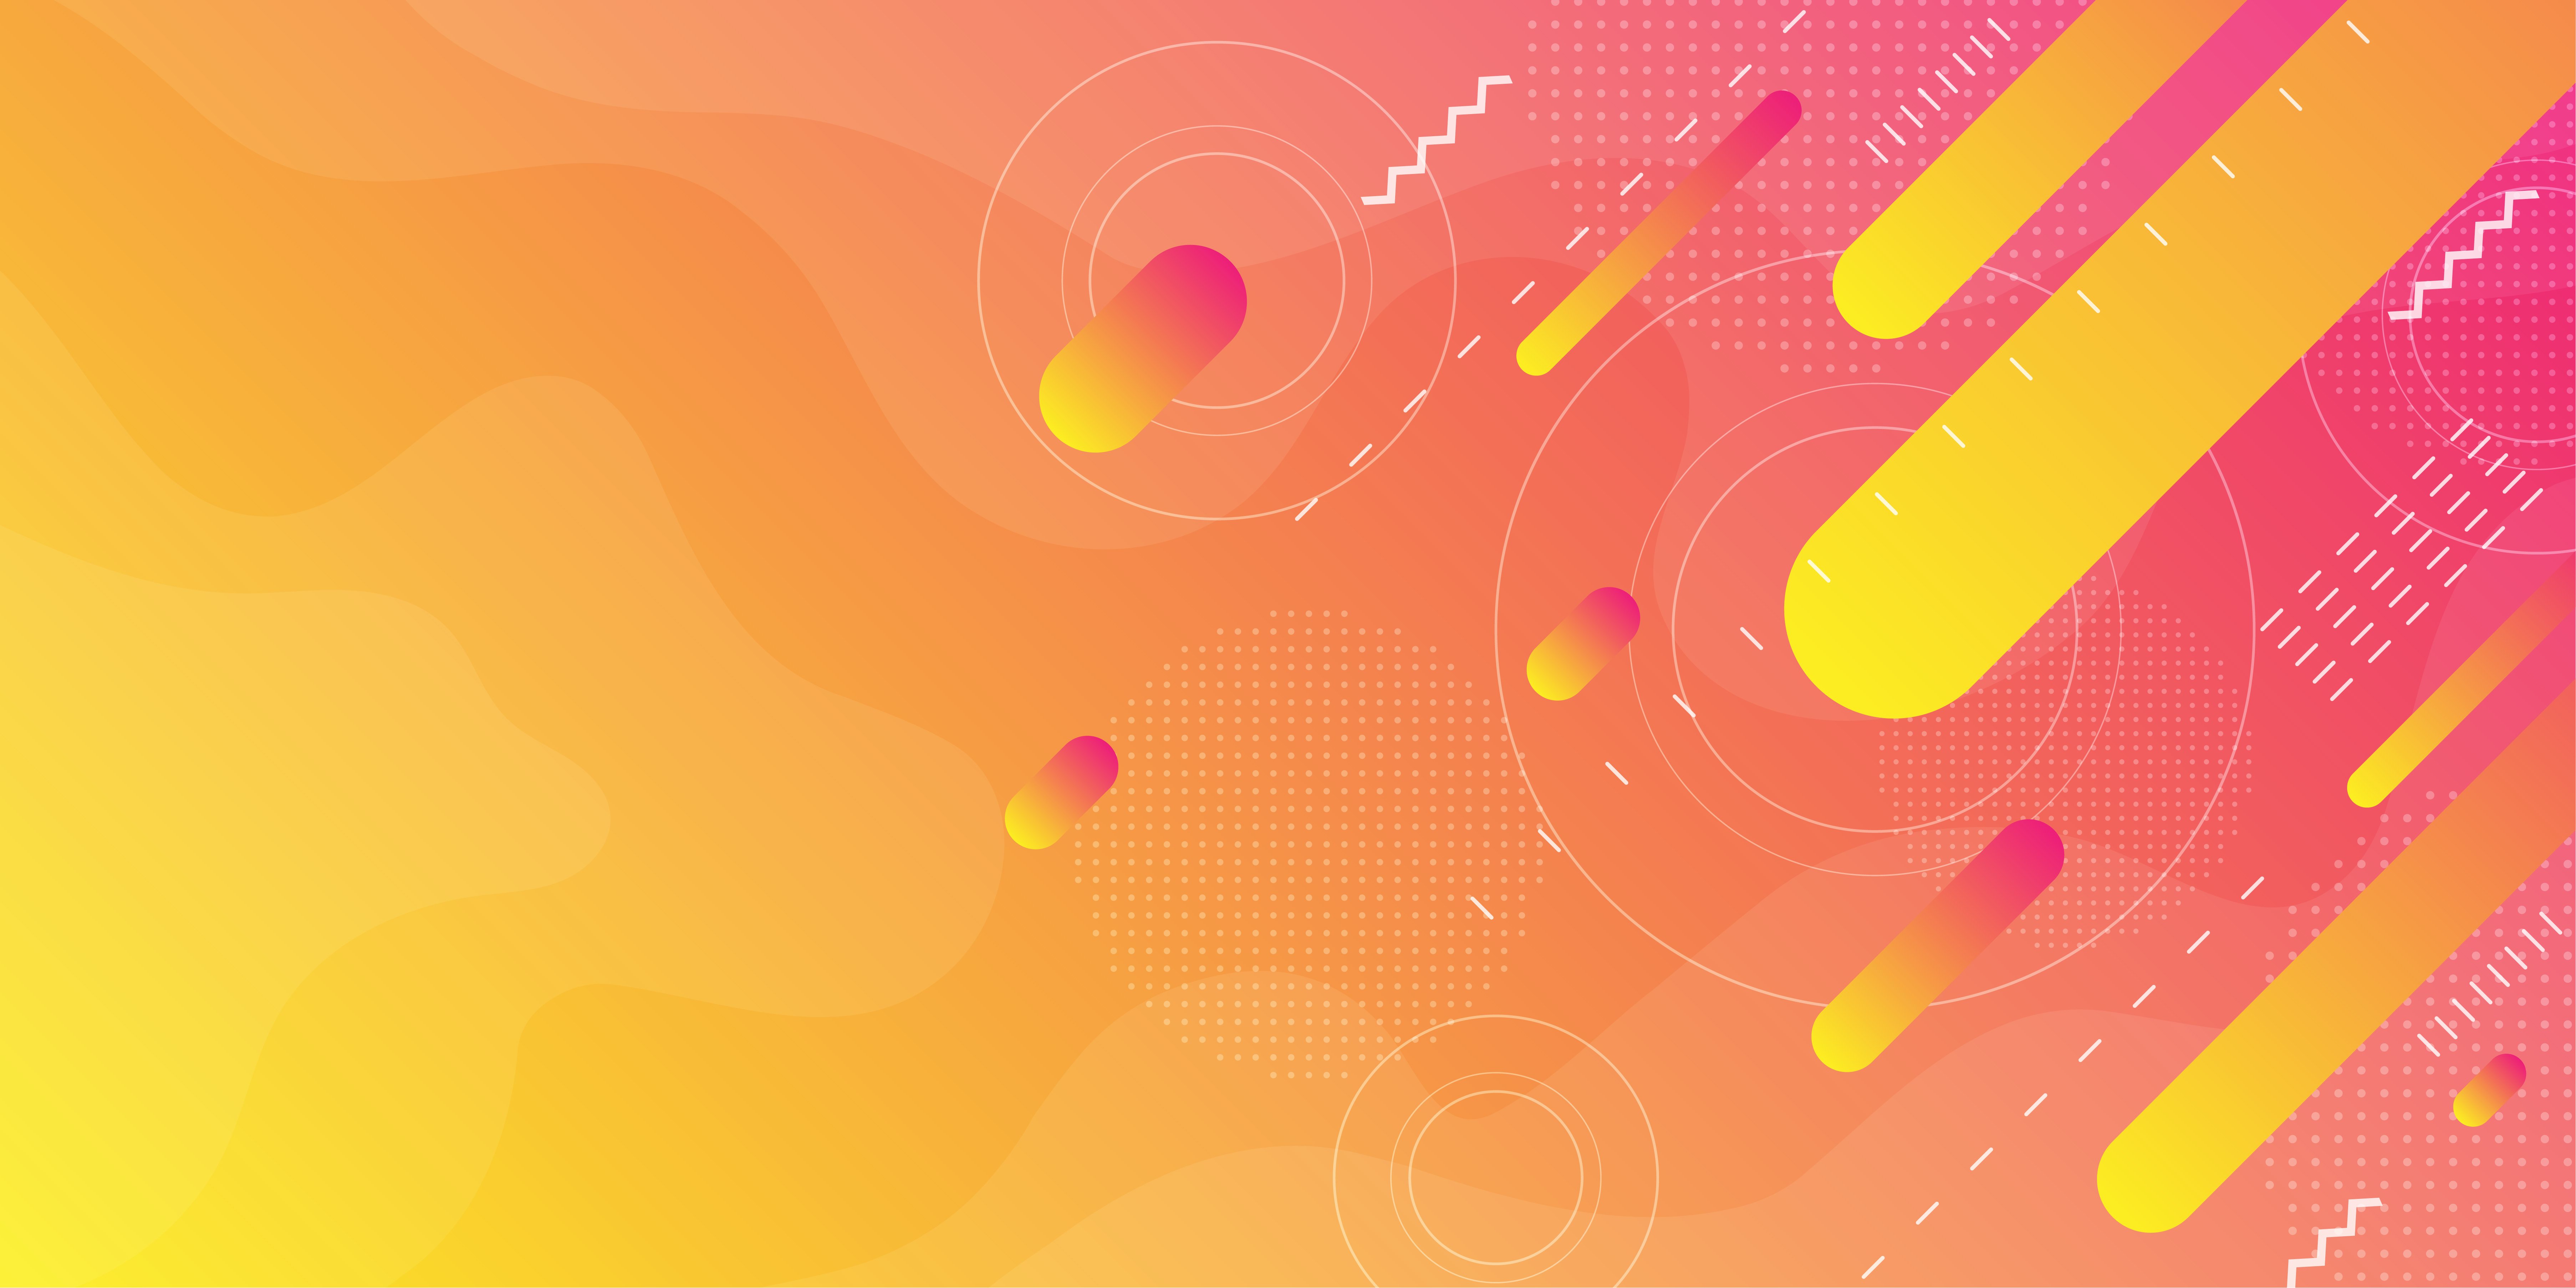 Yellow orange and pink fluid background with diagonal shapes